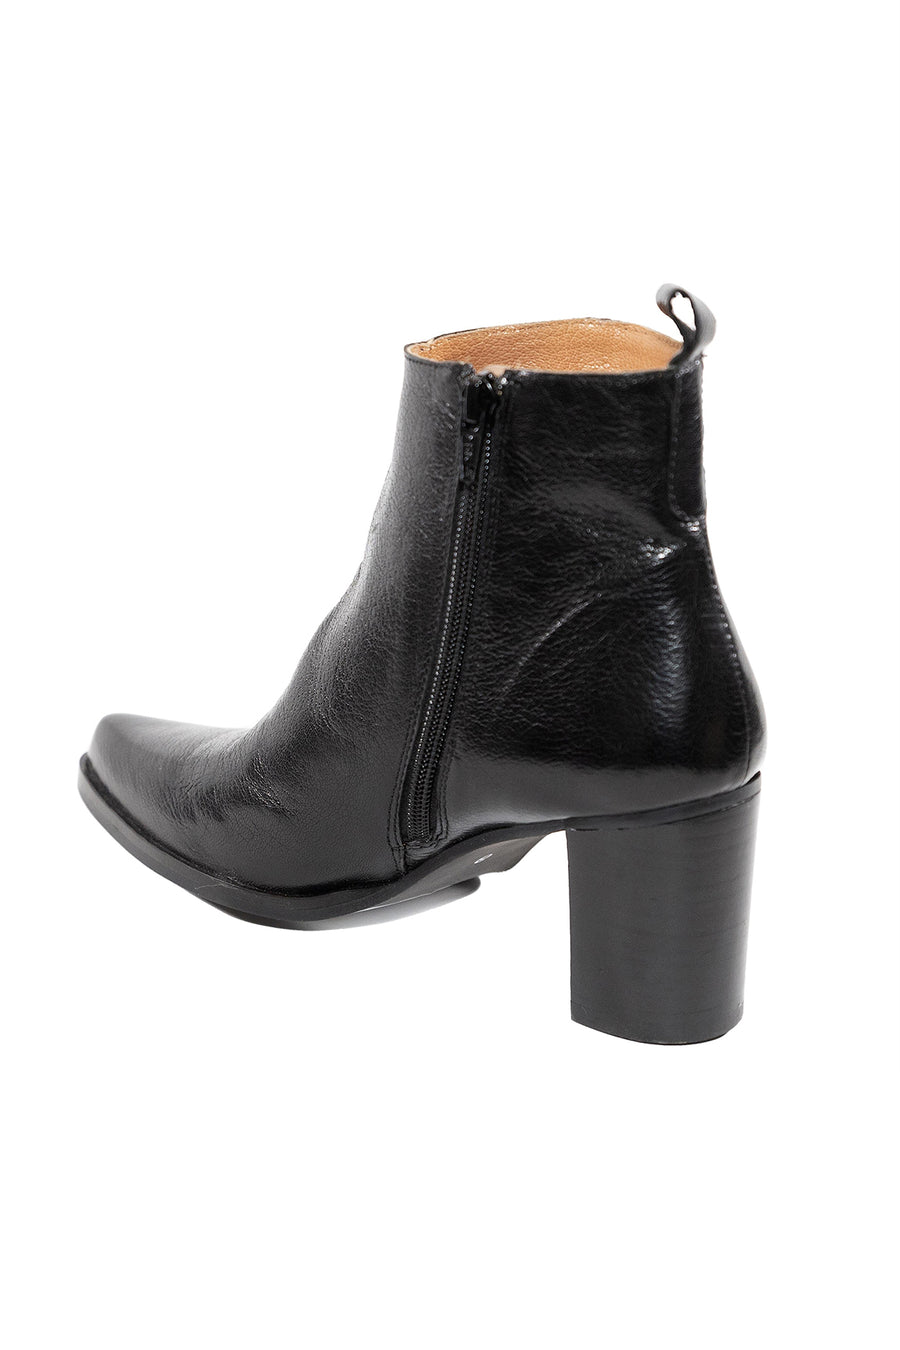 Willow Black Leather Heeled Bootie